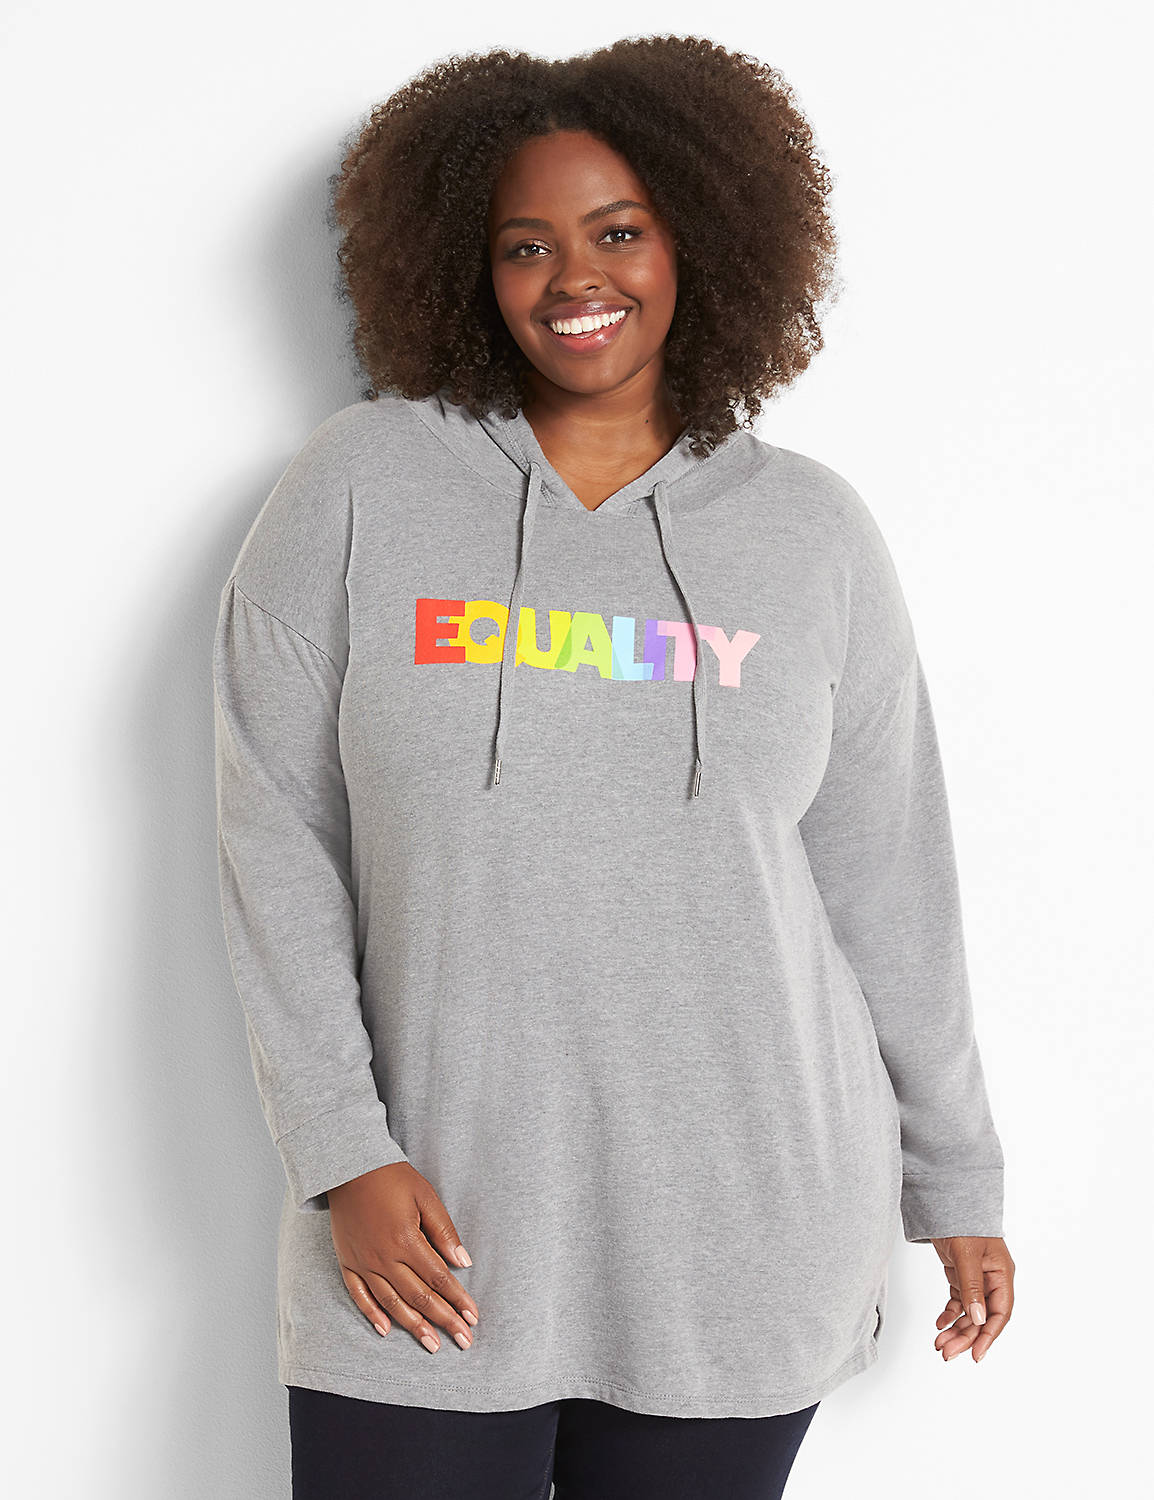 Long Sleeve Drop Shoulder Hoodie Tunic Graphic: Equality Pride 1123088:BTC30 Medium Heather Gray:10/12 Product Image 1